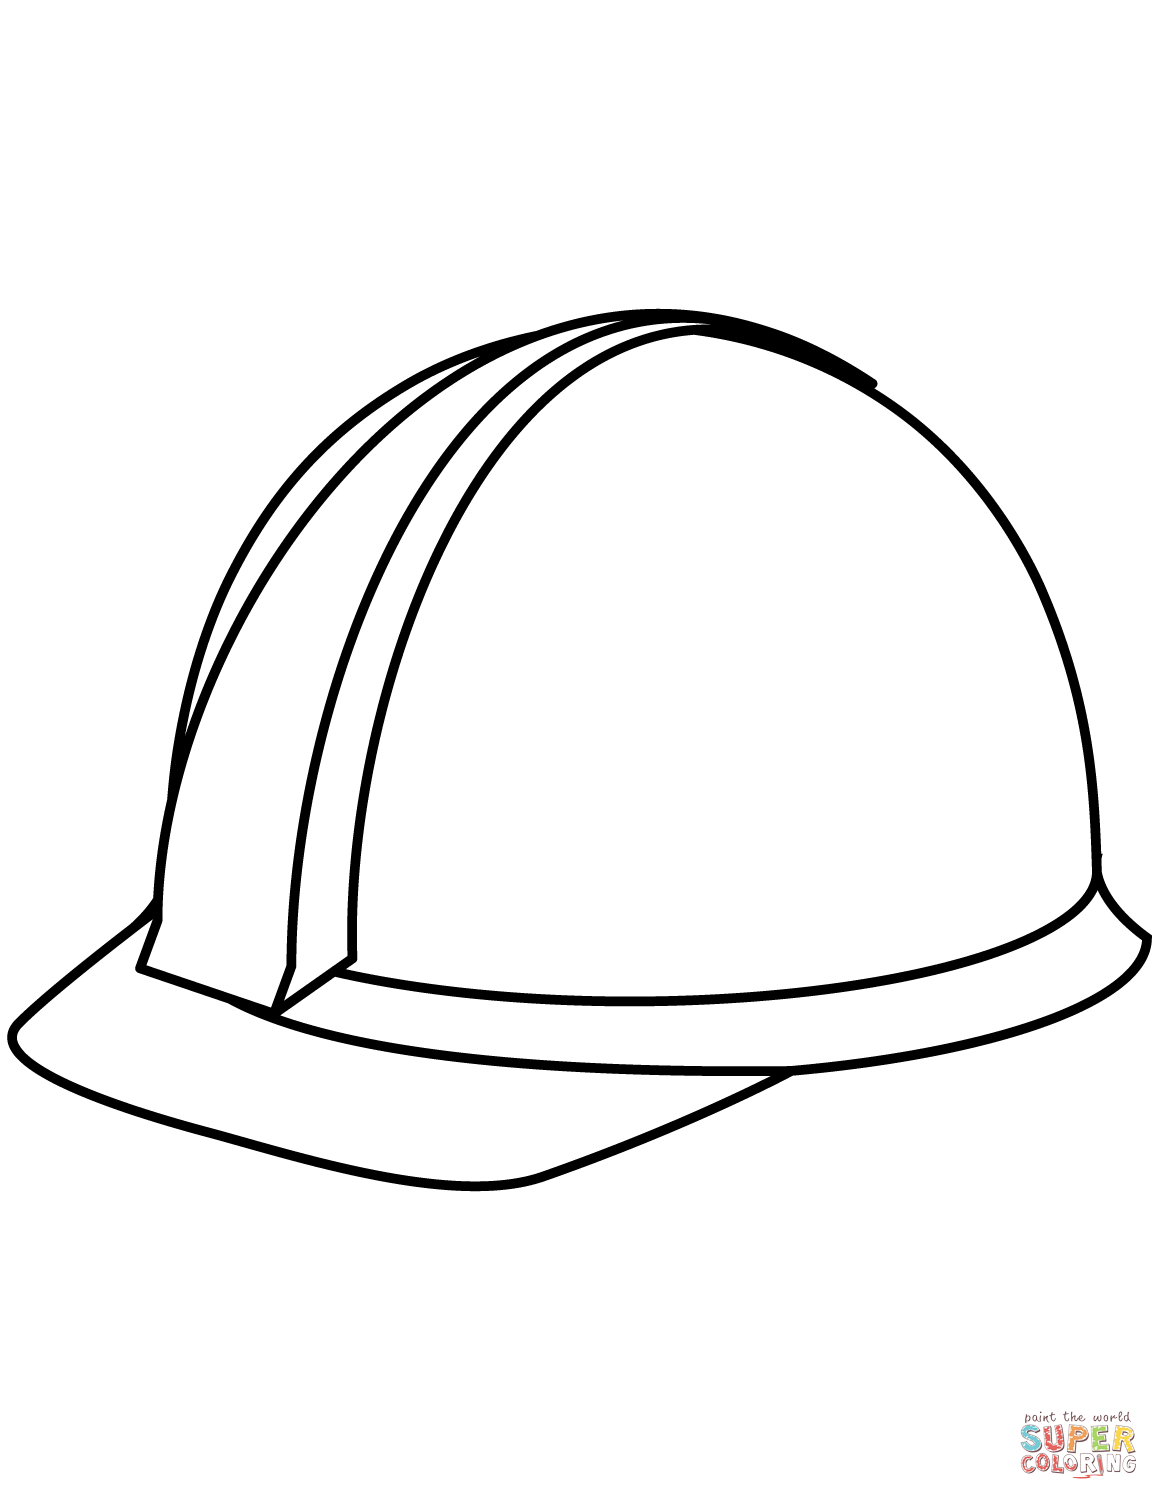 Hard Hat Coloring Page Hard Hat Coloring Page Free Printable Coloring Pages